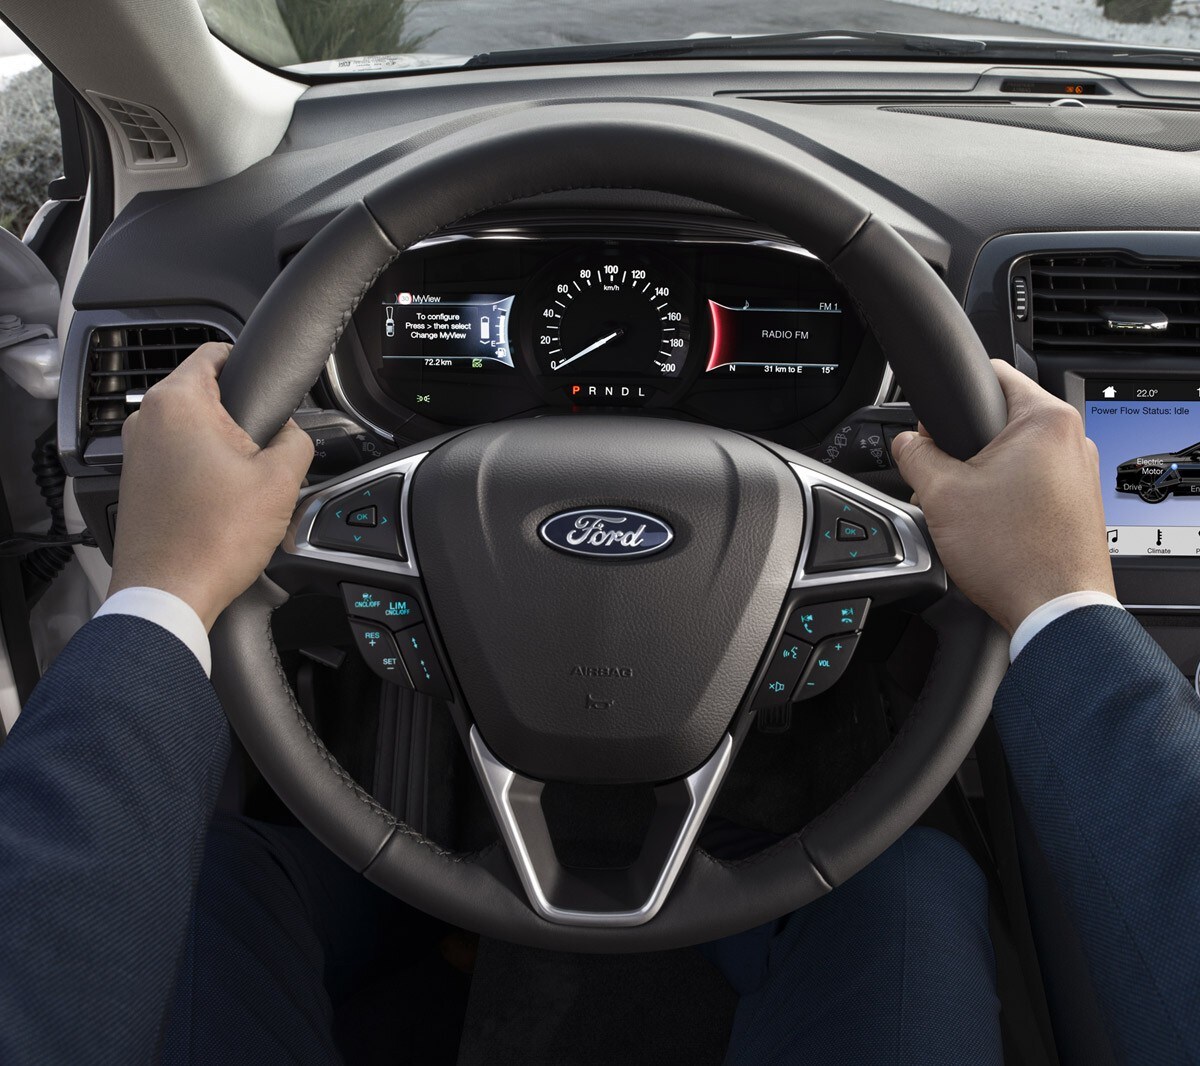 Ford Mondeo interior close up of hands with steering wheel and dashboard